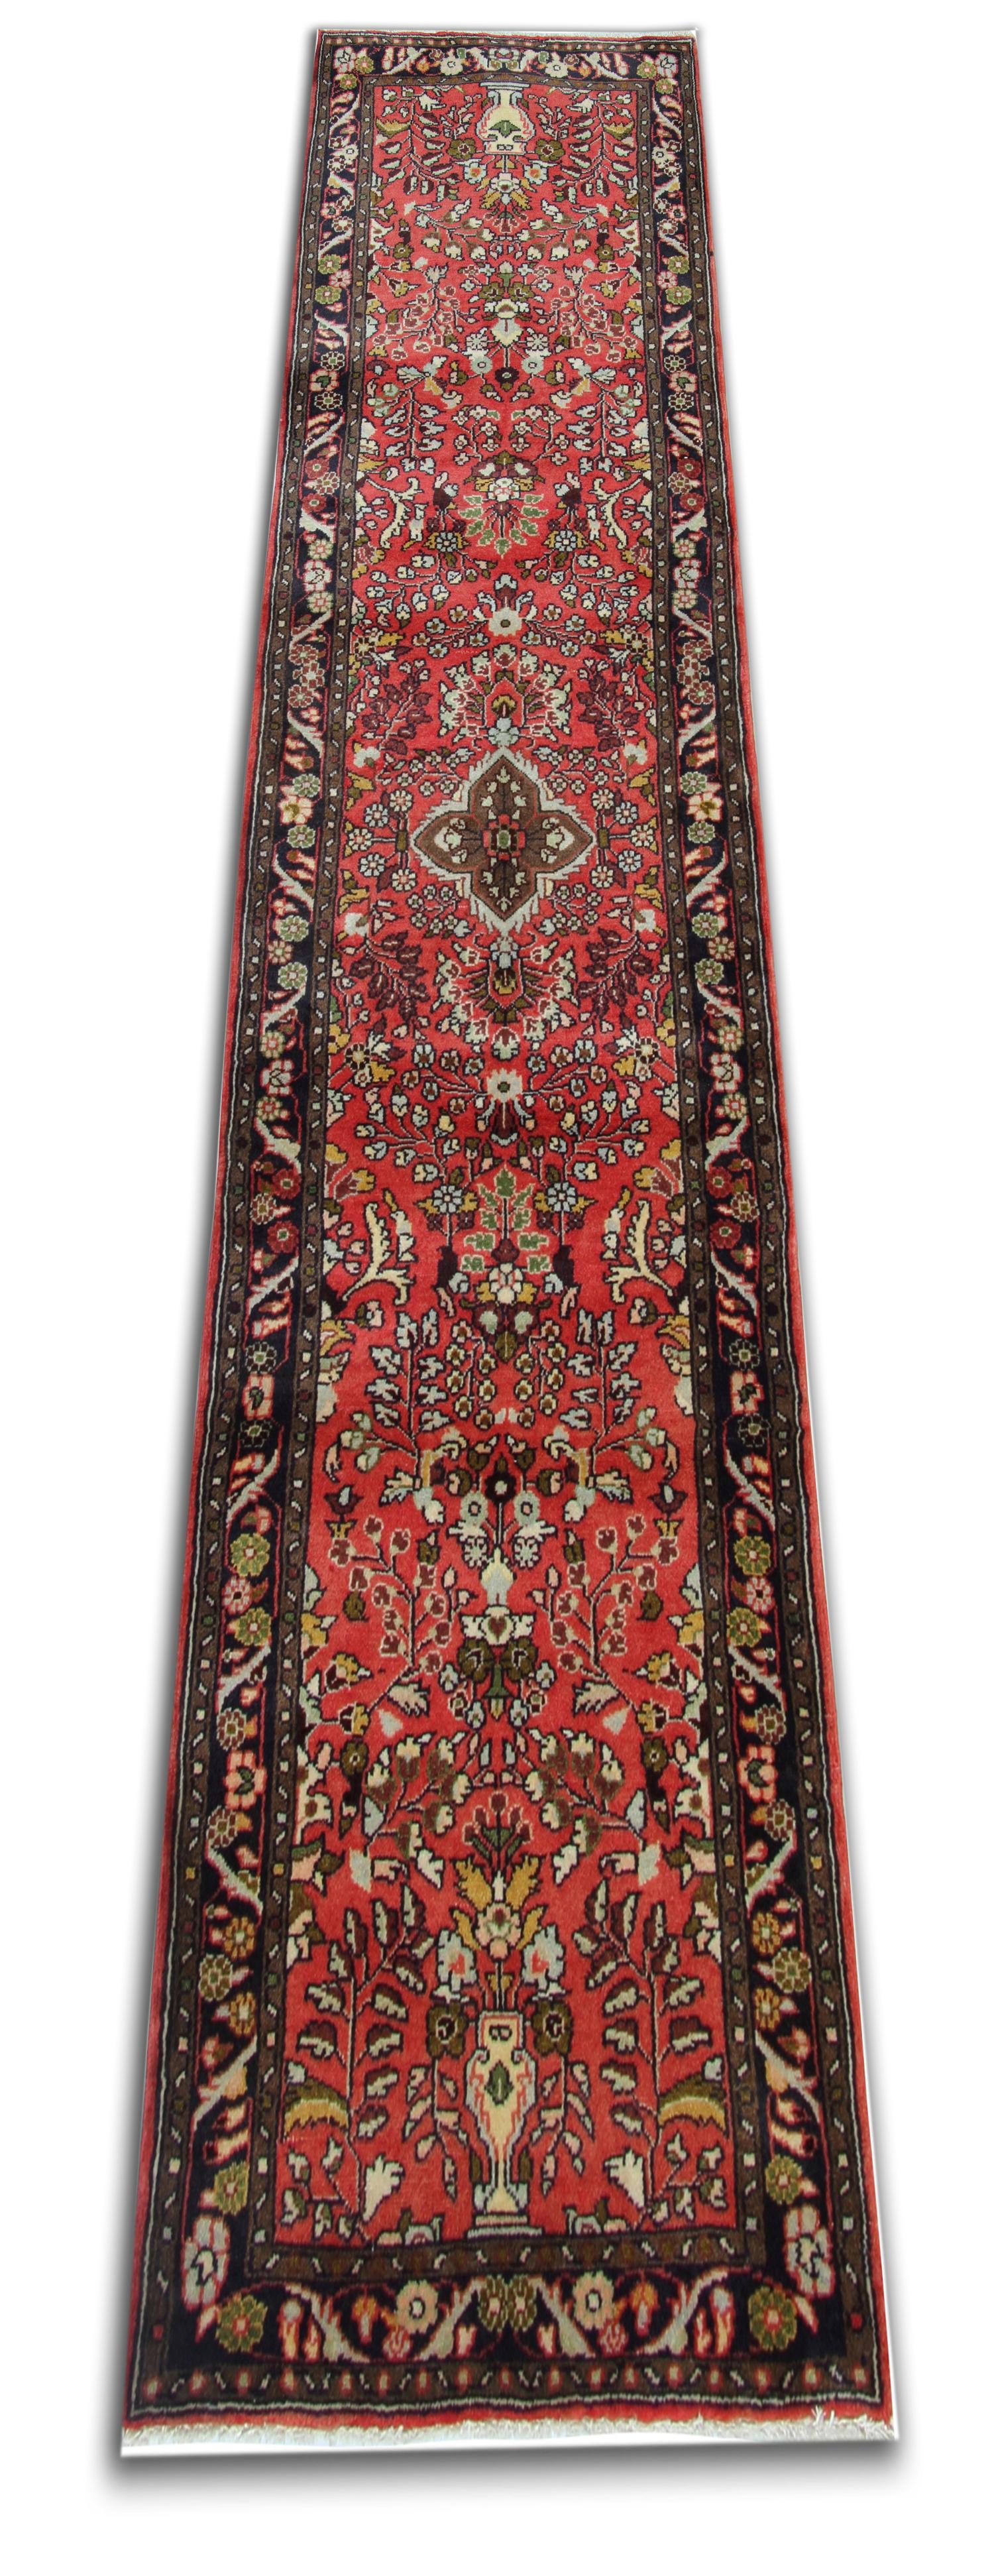 This Vintage carpet was constructed by hand with fine organic materials. Woven with a traditional design and colour palette. Beautifully designed with a rich red background and grey, brown cream and beige accents that make up the sophisticated,